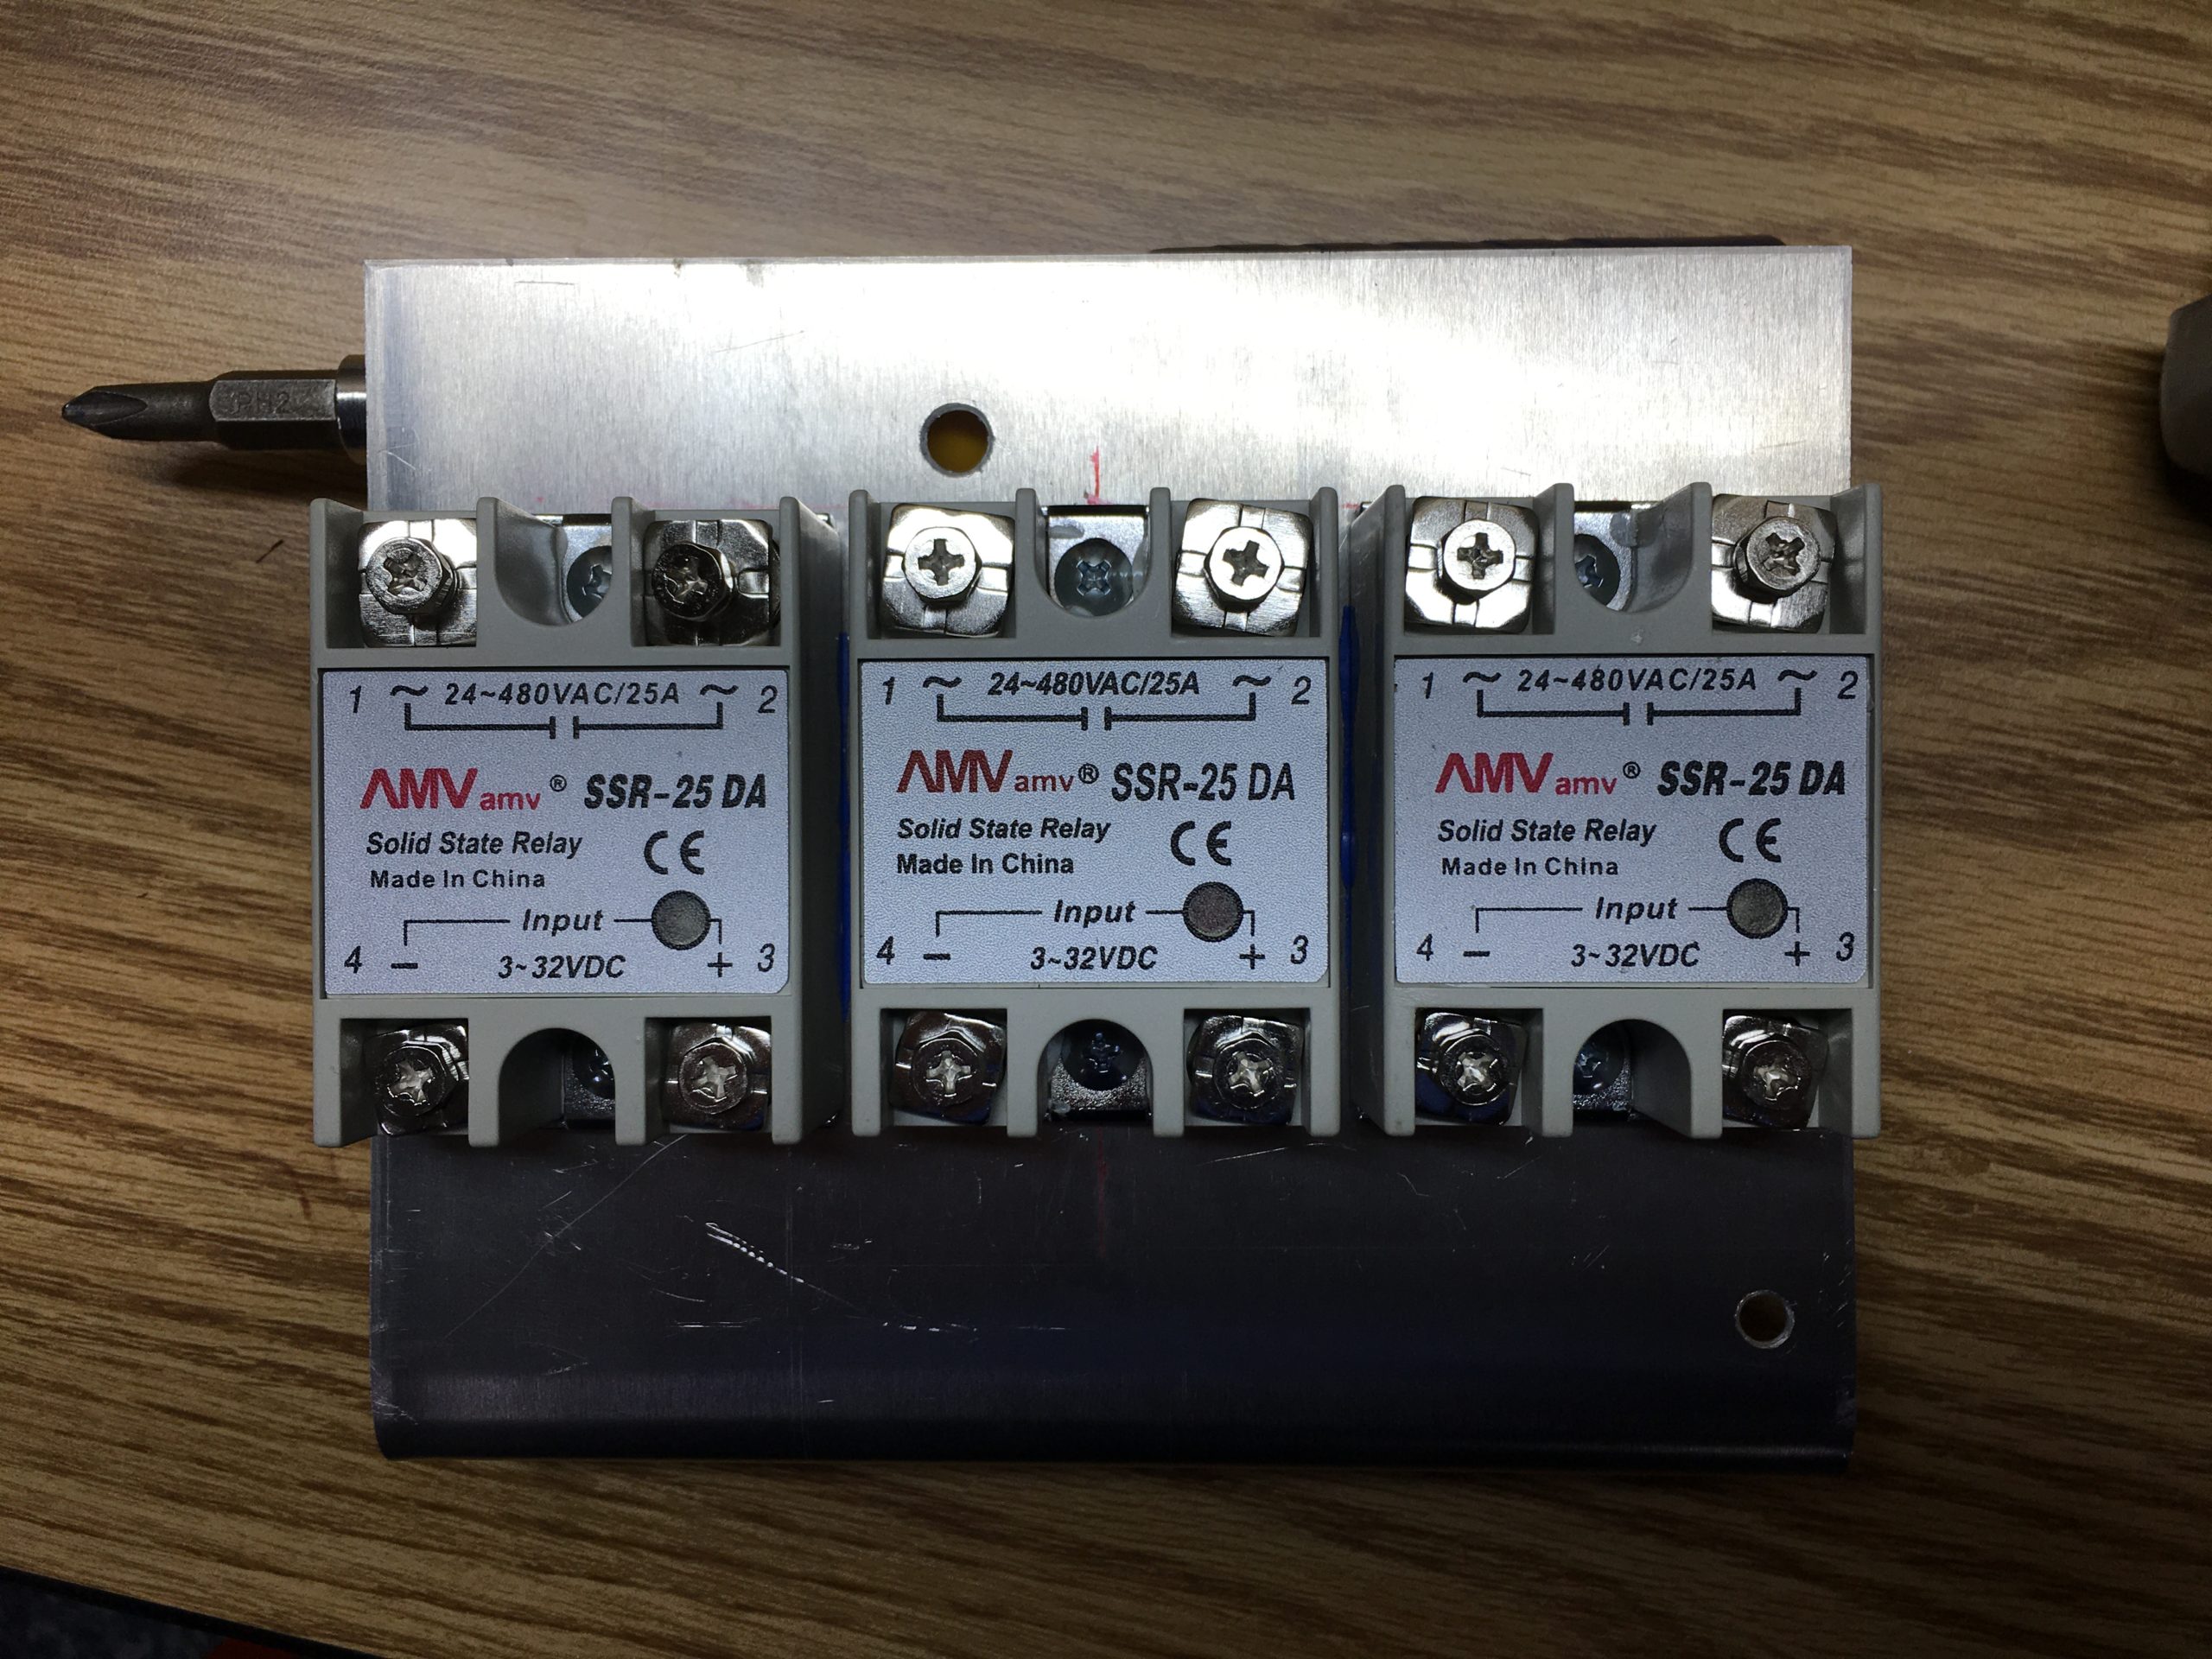 Solid state relays mounted on aluminum plate